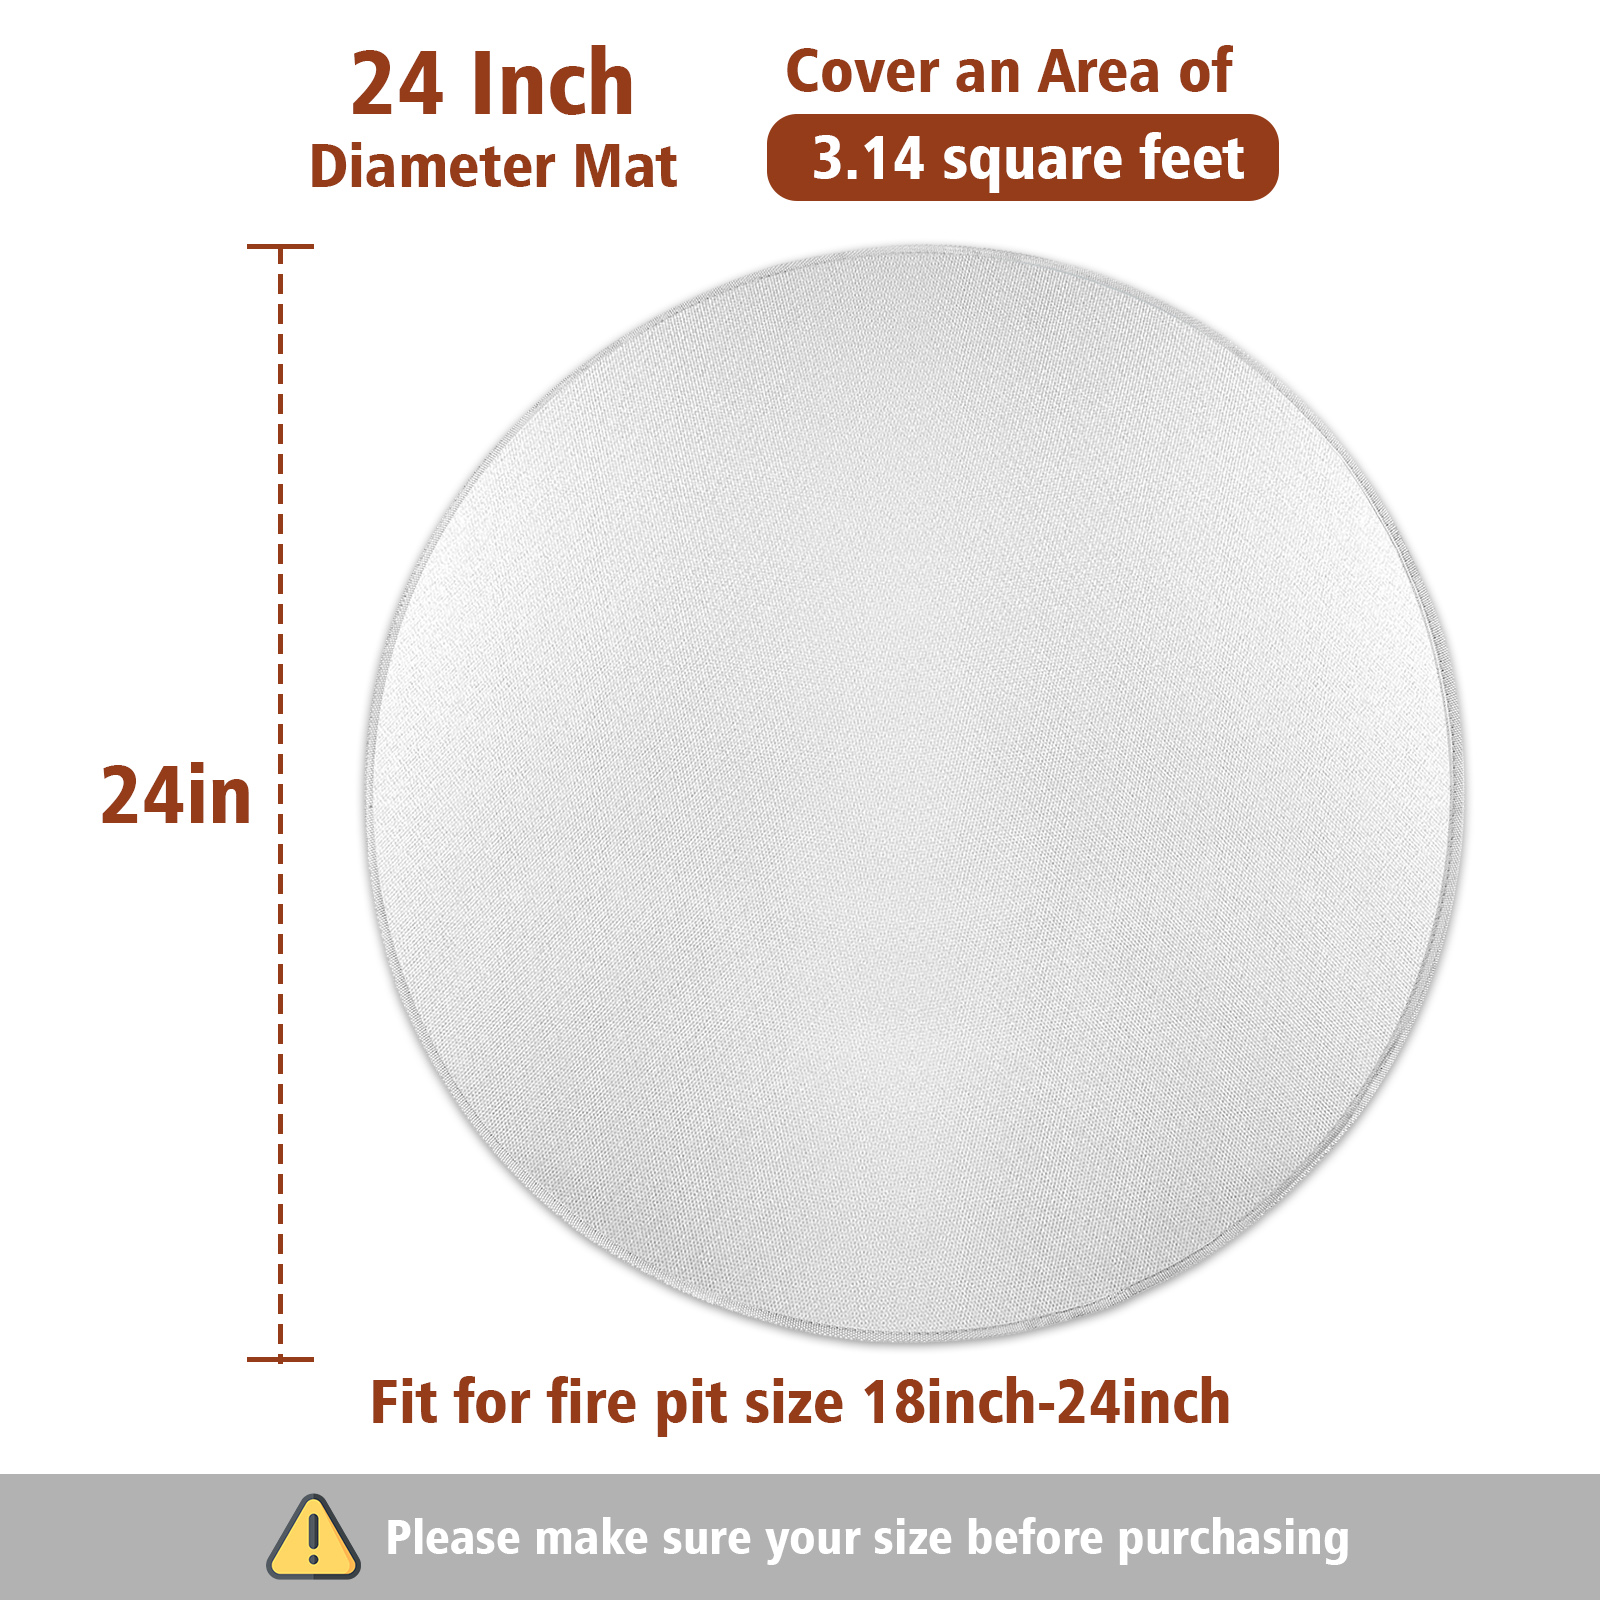 KINGSO-2436In-Fire-Pit-Mat-Round-Fireproof-High-Temperature-Resistant-Moisutre-proof-Mat-for-Deck-Pa-1890286-9